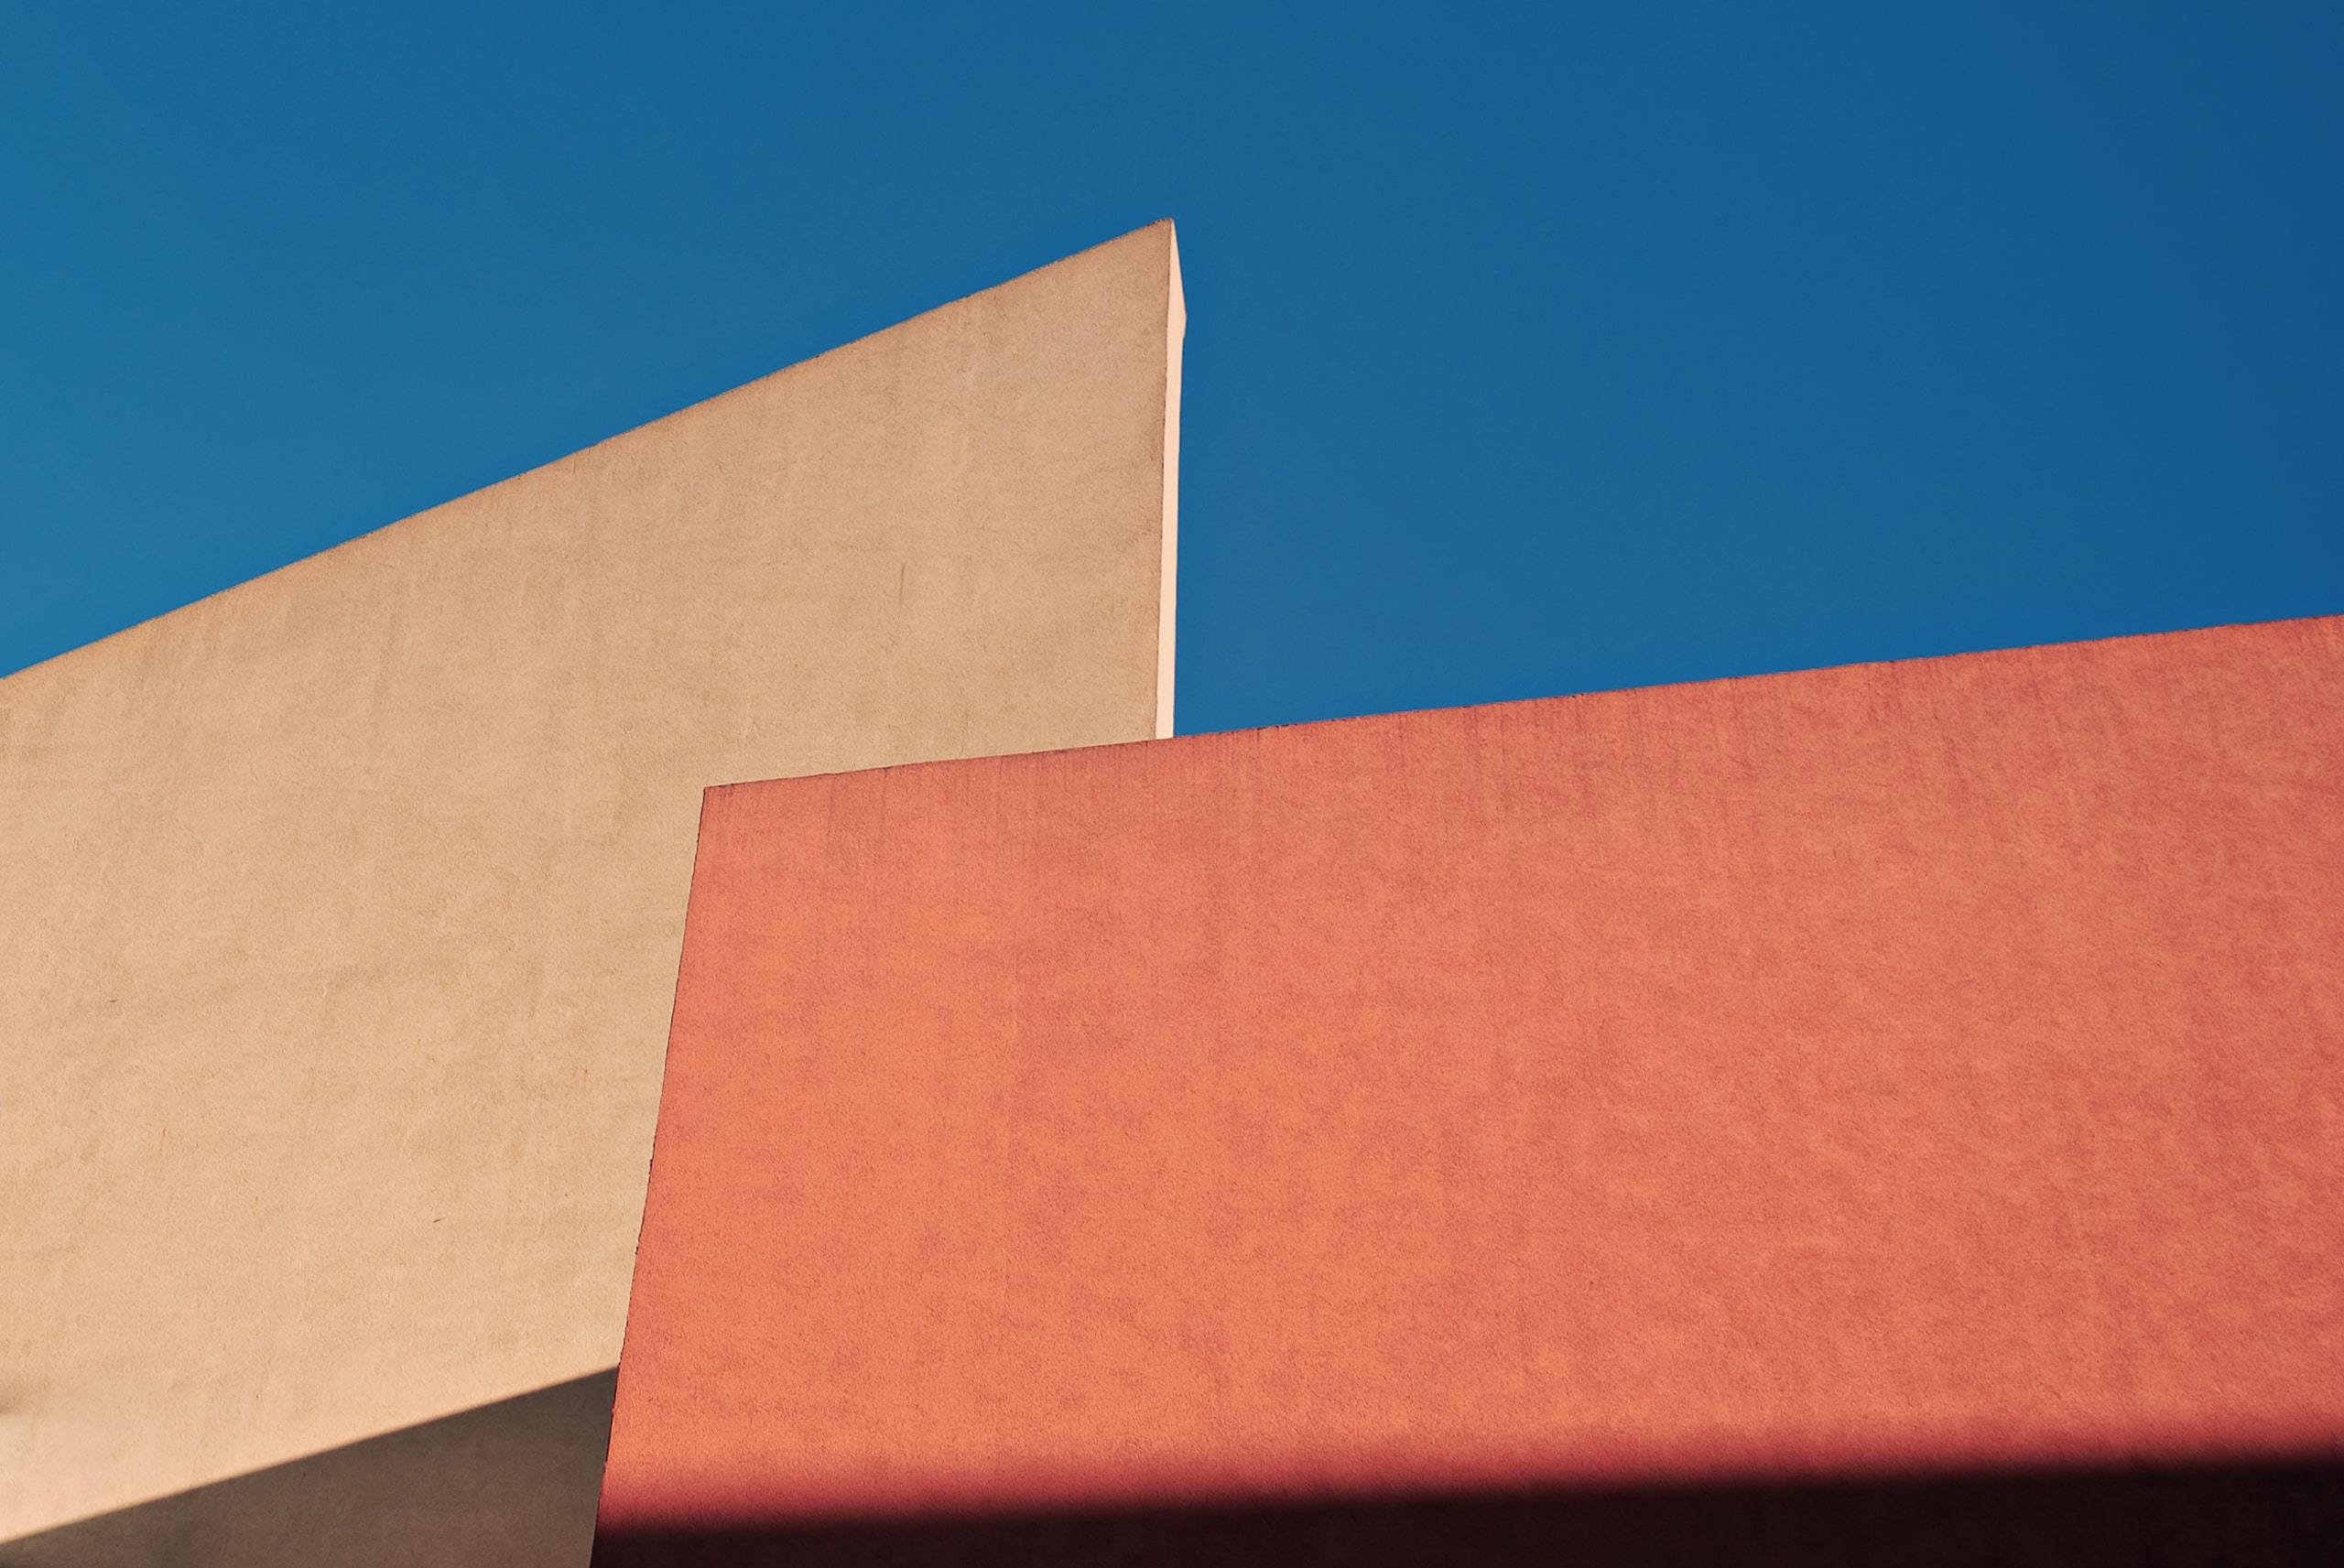 Abstract terra cotta and cream walls against blue sky